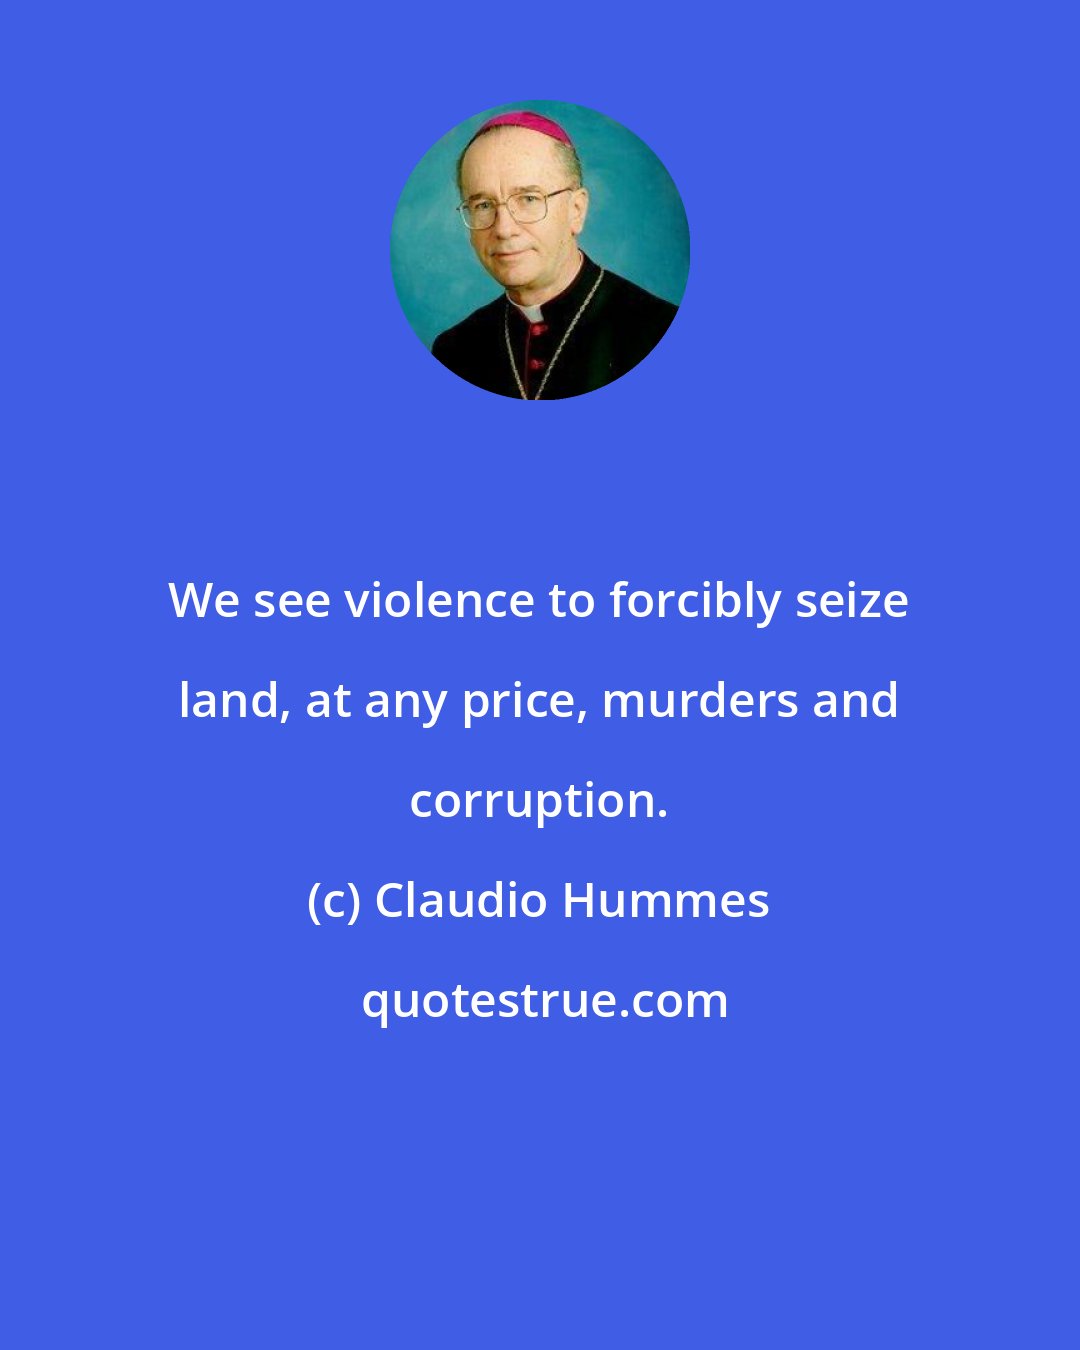 Claudio Hummes: We see violence to forcibly seize land, at any price, murders and corruption.